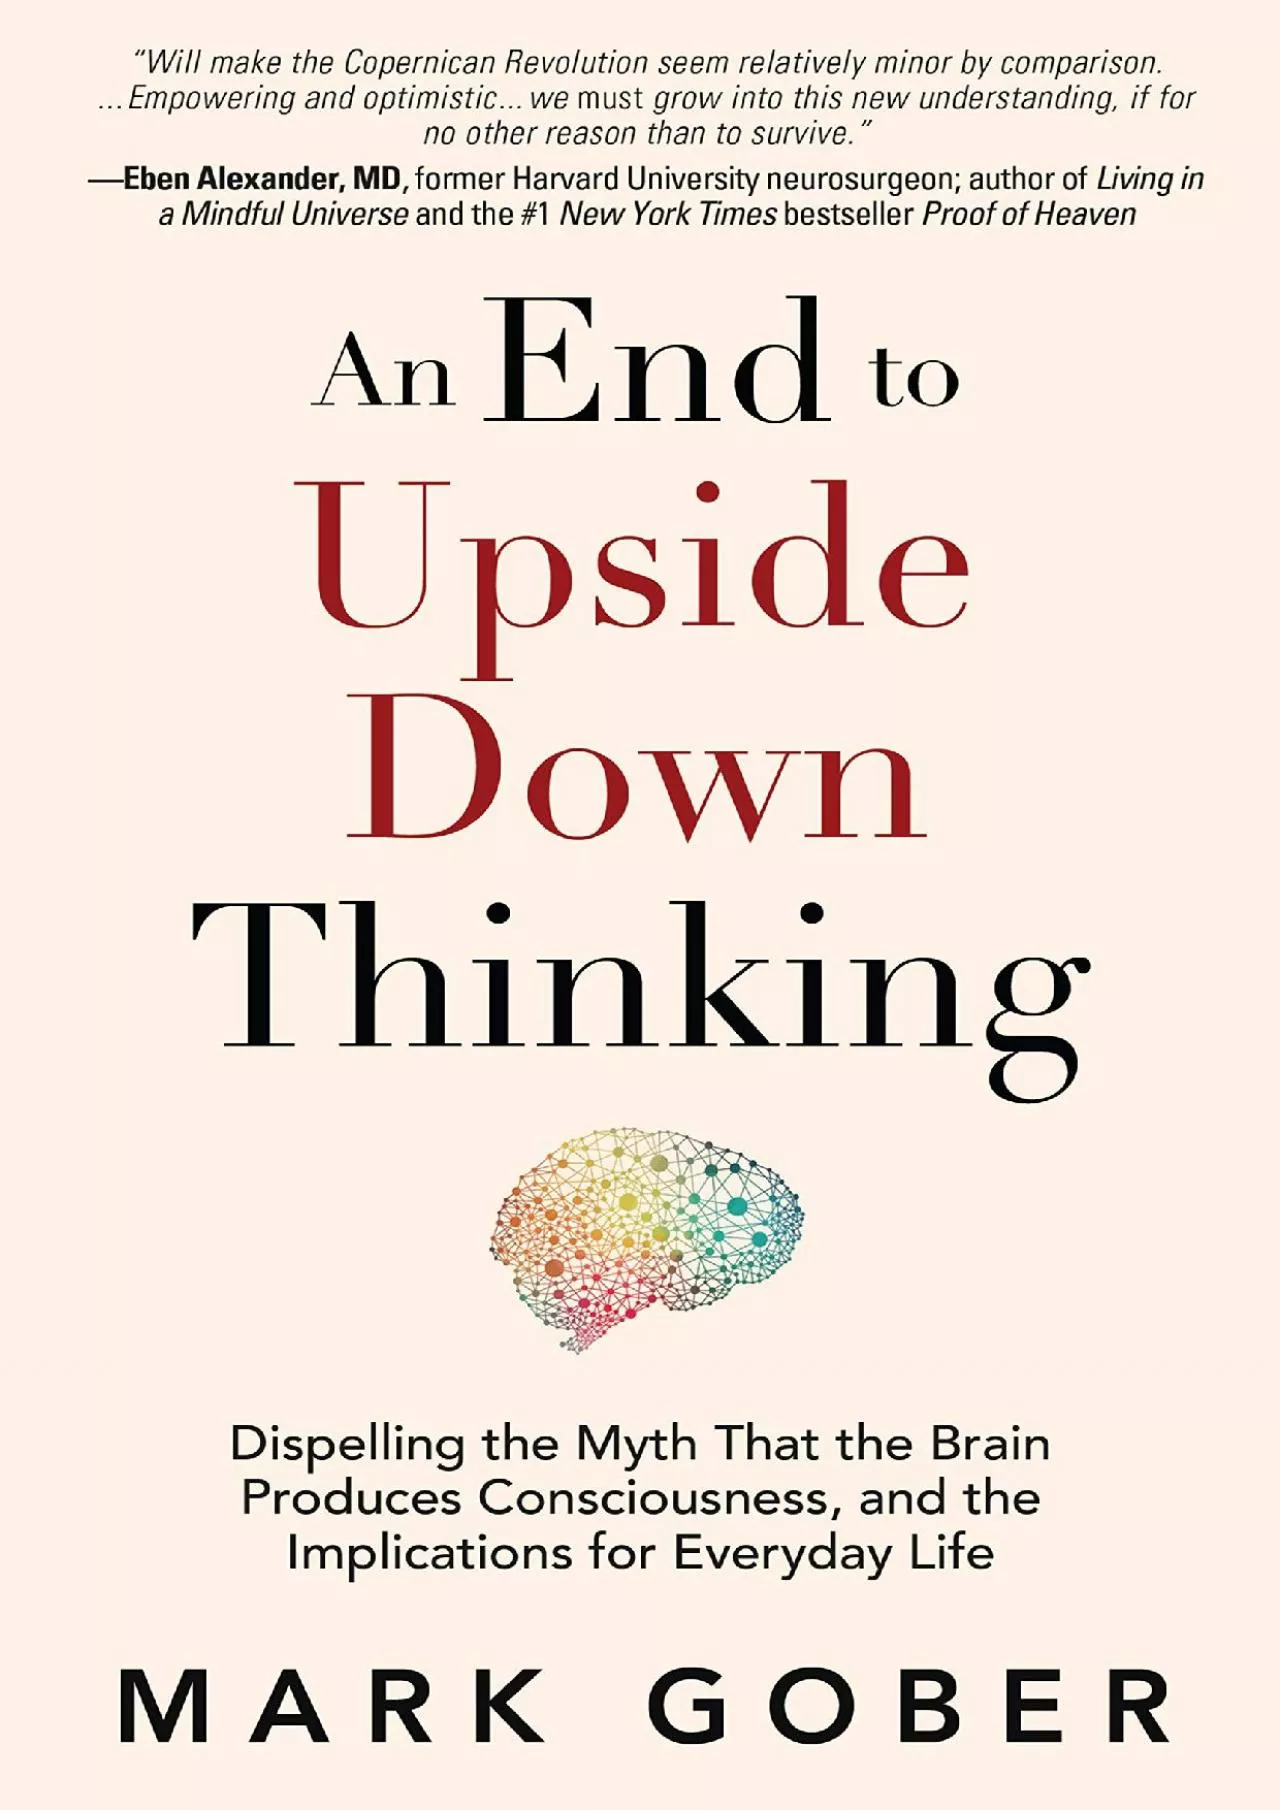 (DOWNLOAD)-An End to Upside Down Thinking: Dispelling the Myth That the Brain Produces